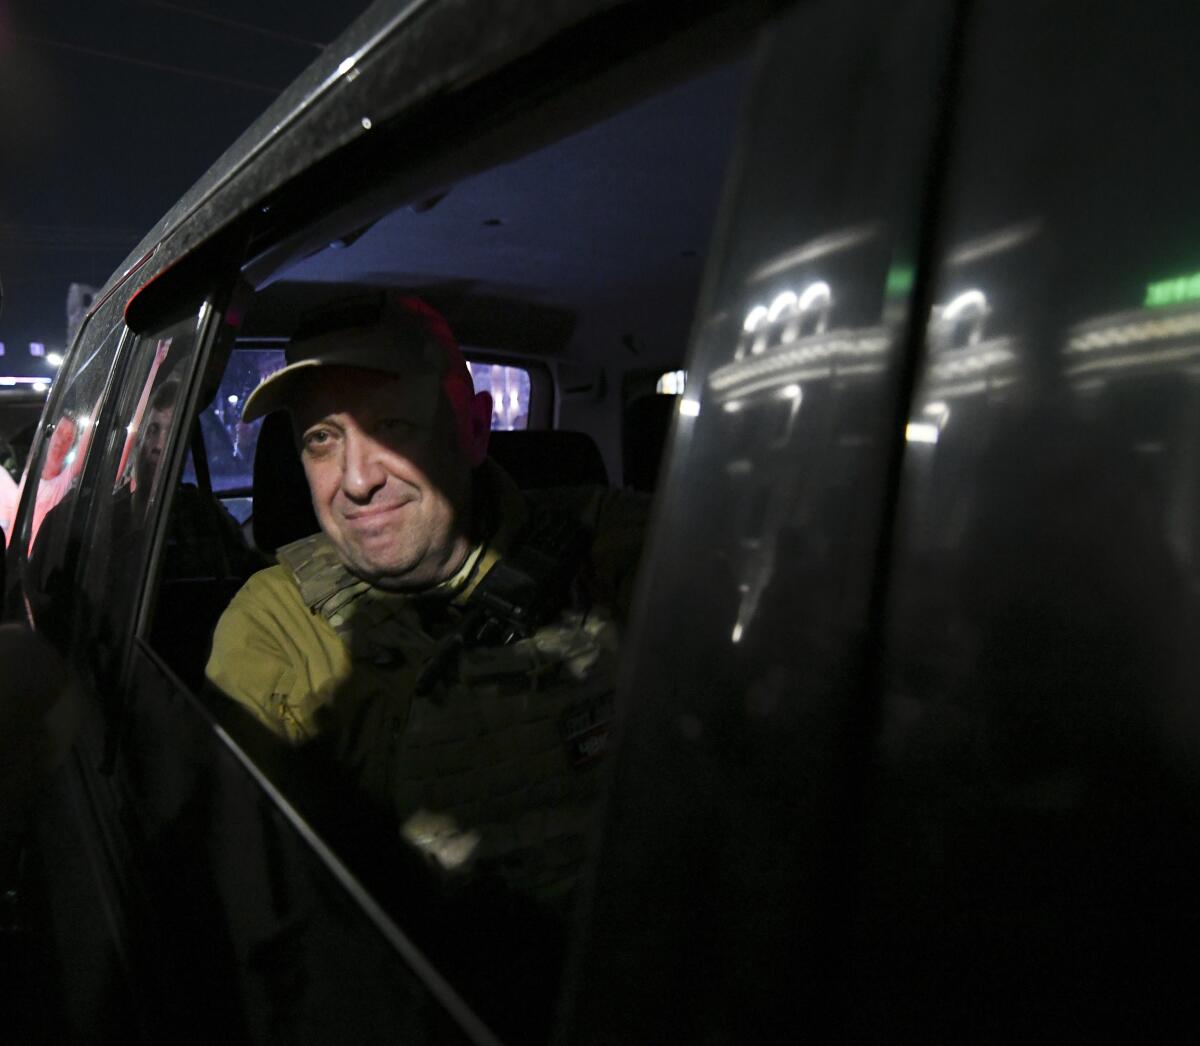 A man looking out of an open passenger window of a black vehicle after dark